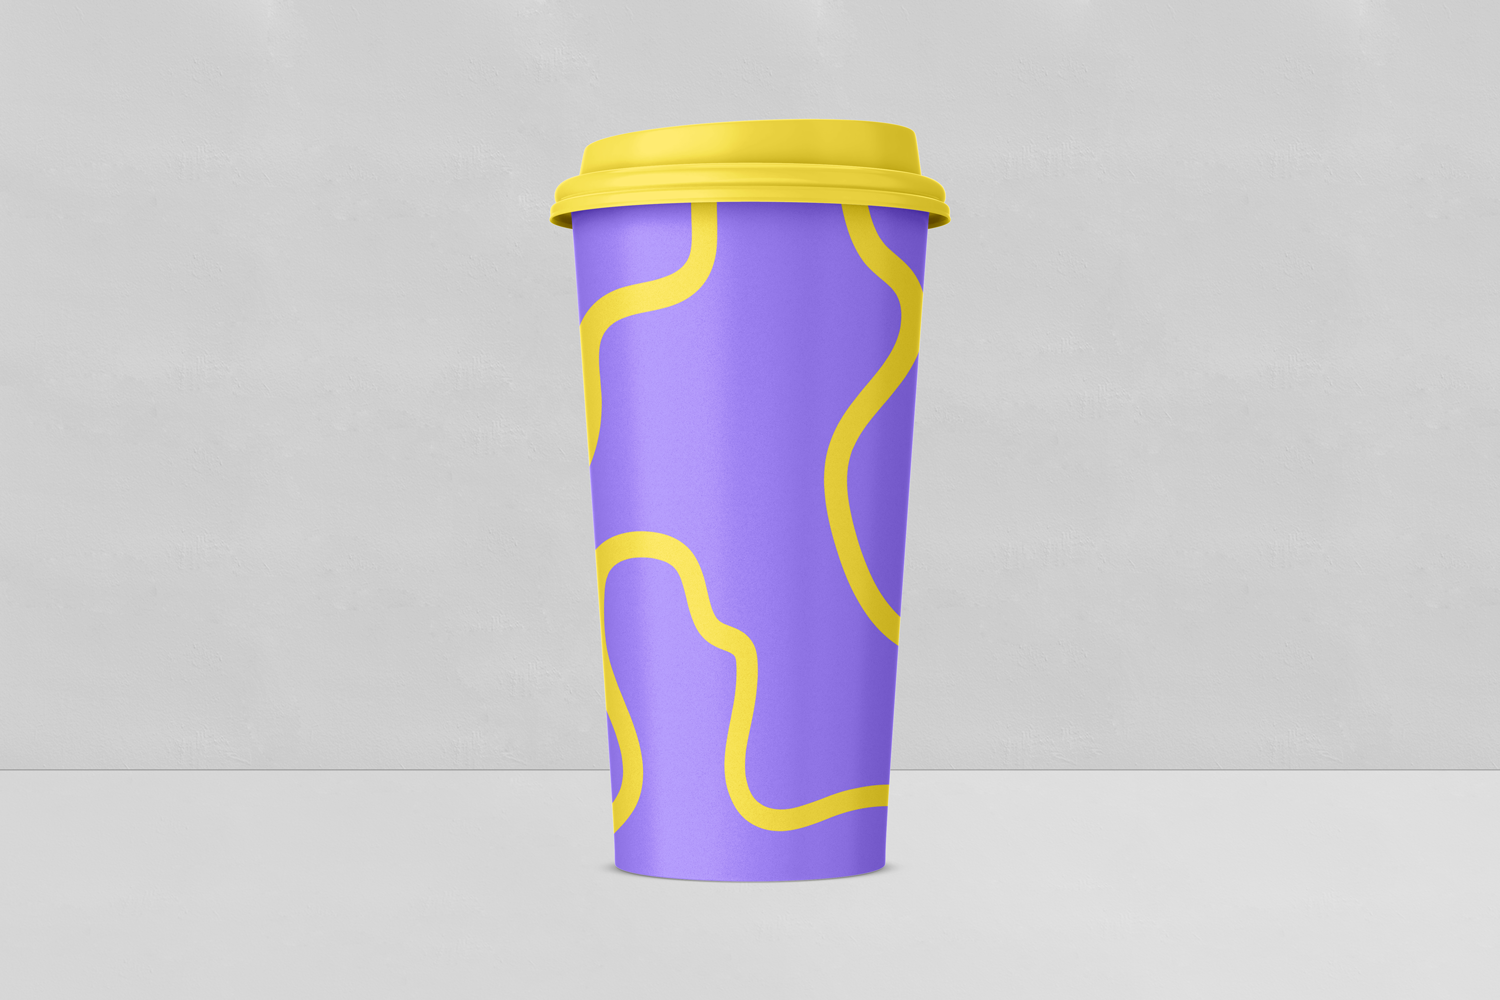 Blue Takeaway coffee cup mockup with yellow design and yellow lid.